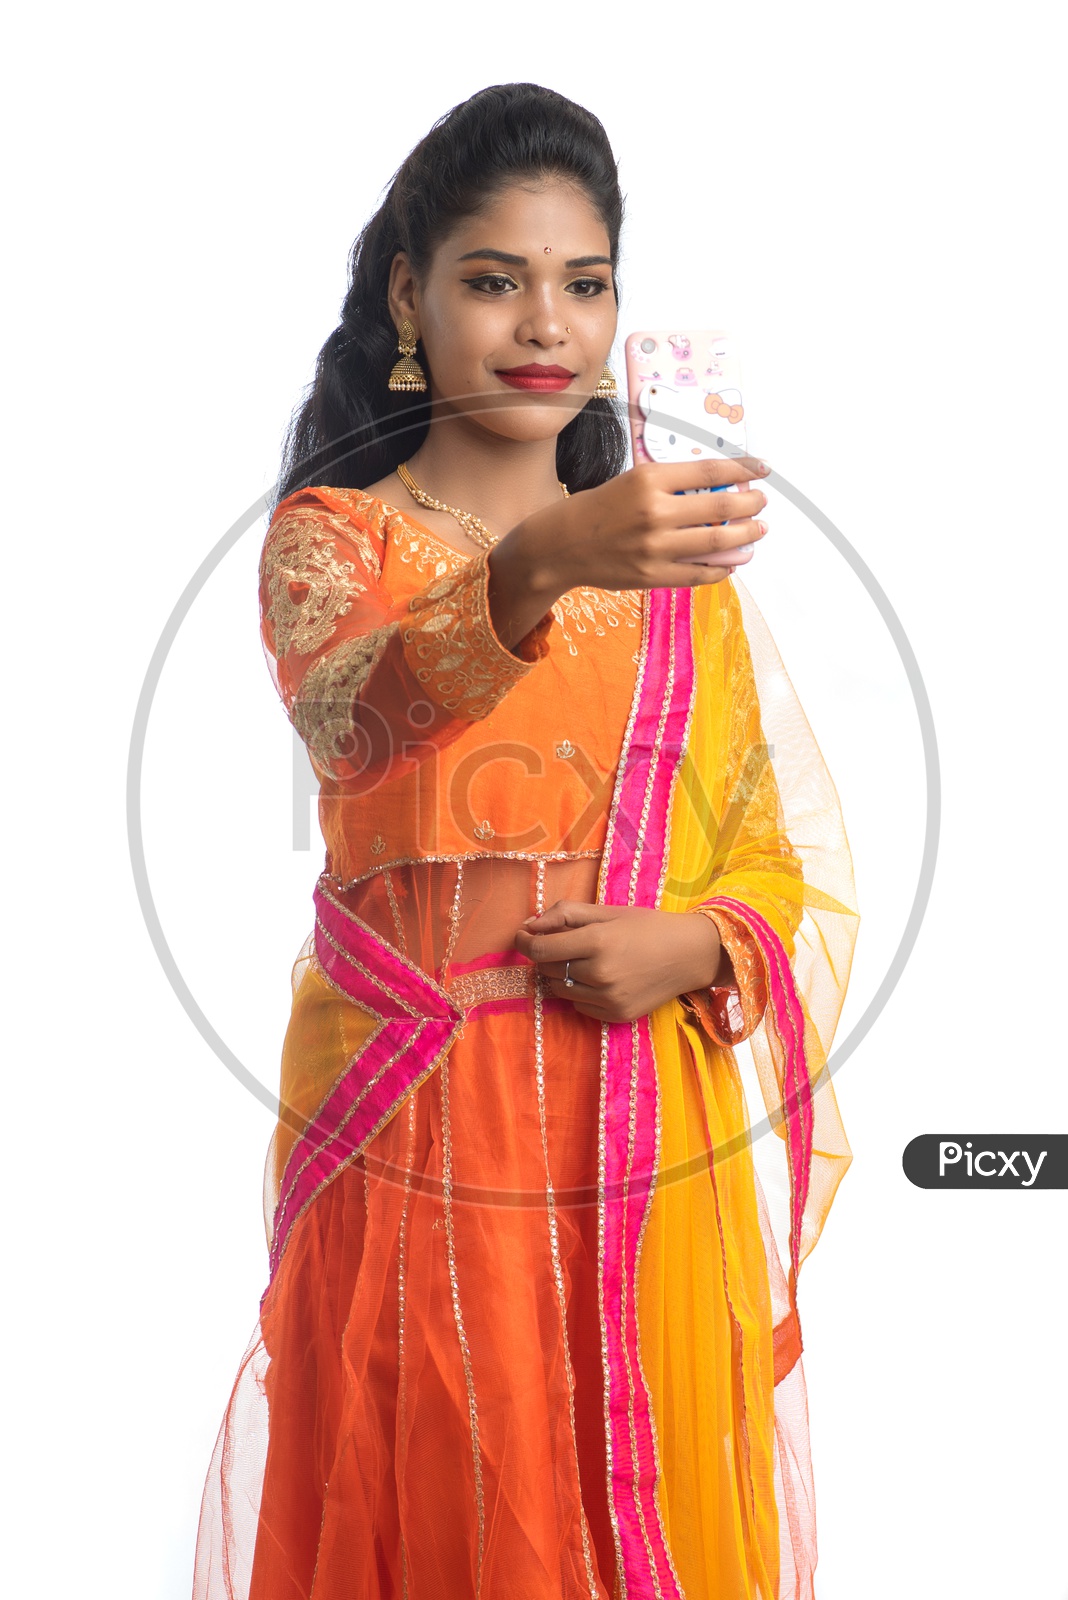 A Young traditional Indian girl Taking a Selfie With Smart Phone on a White Isolated Background